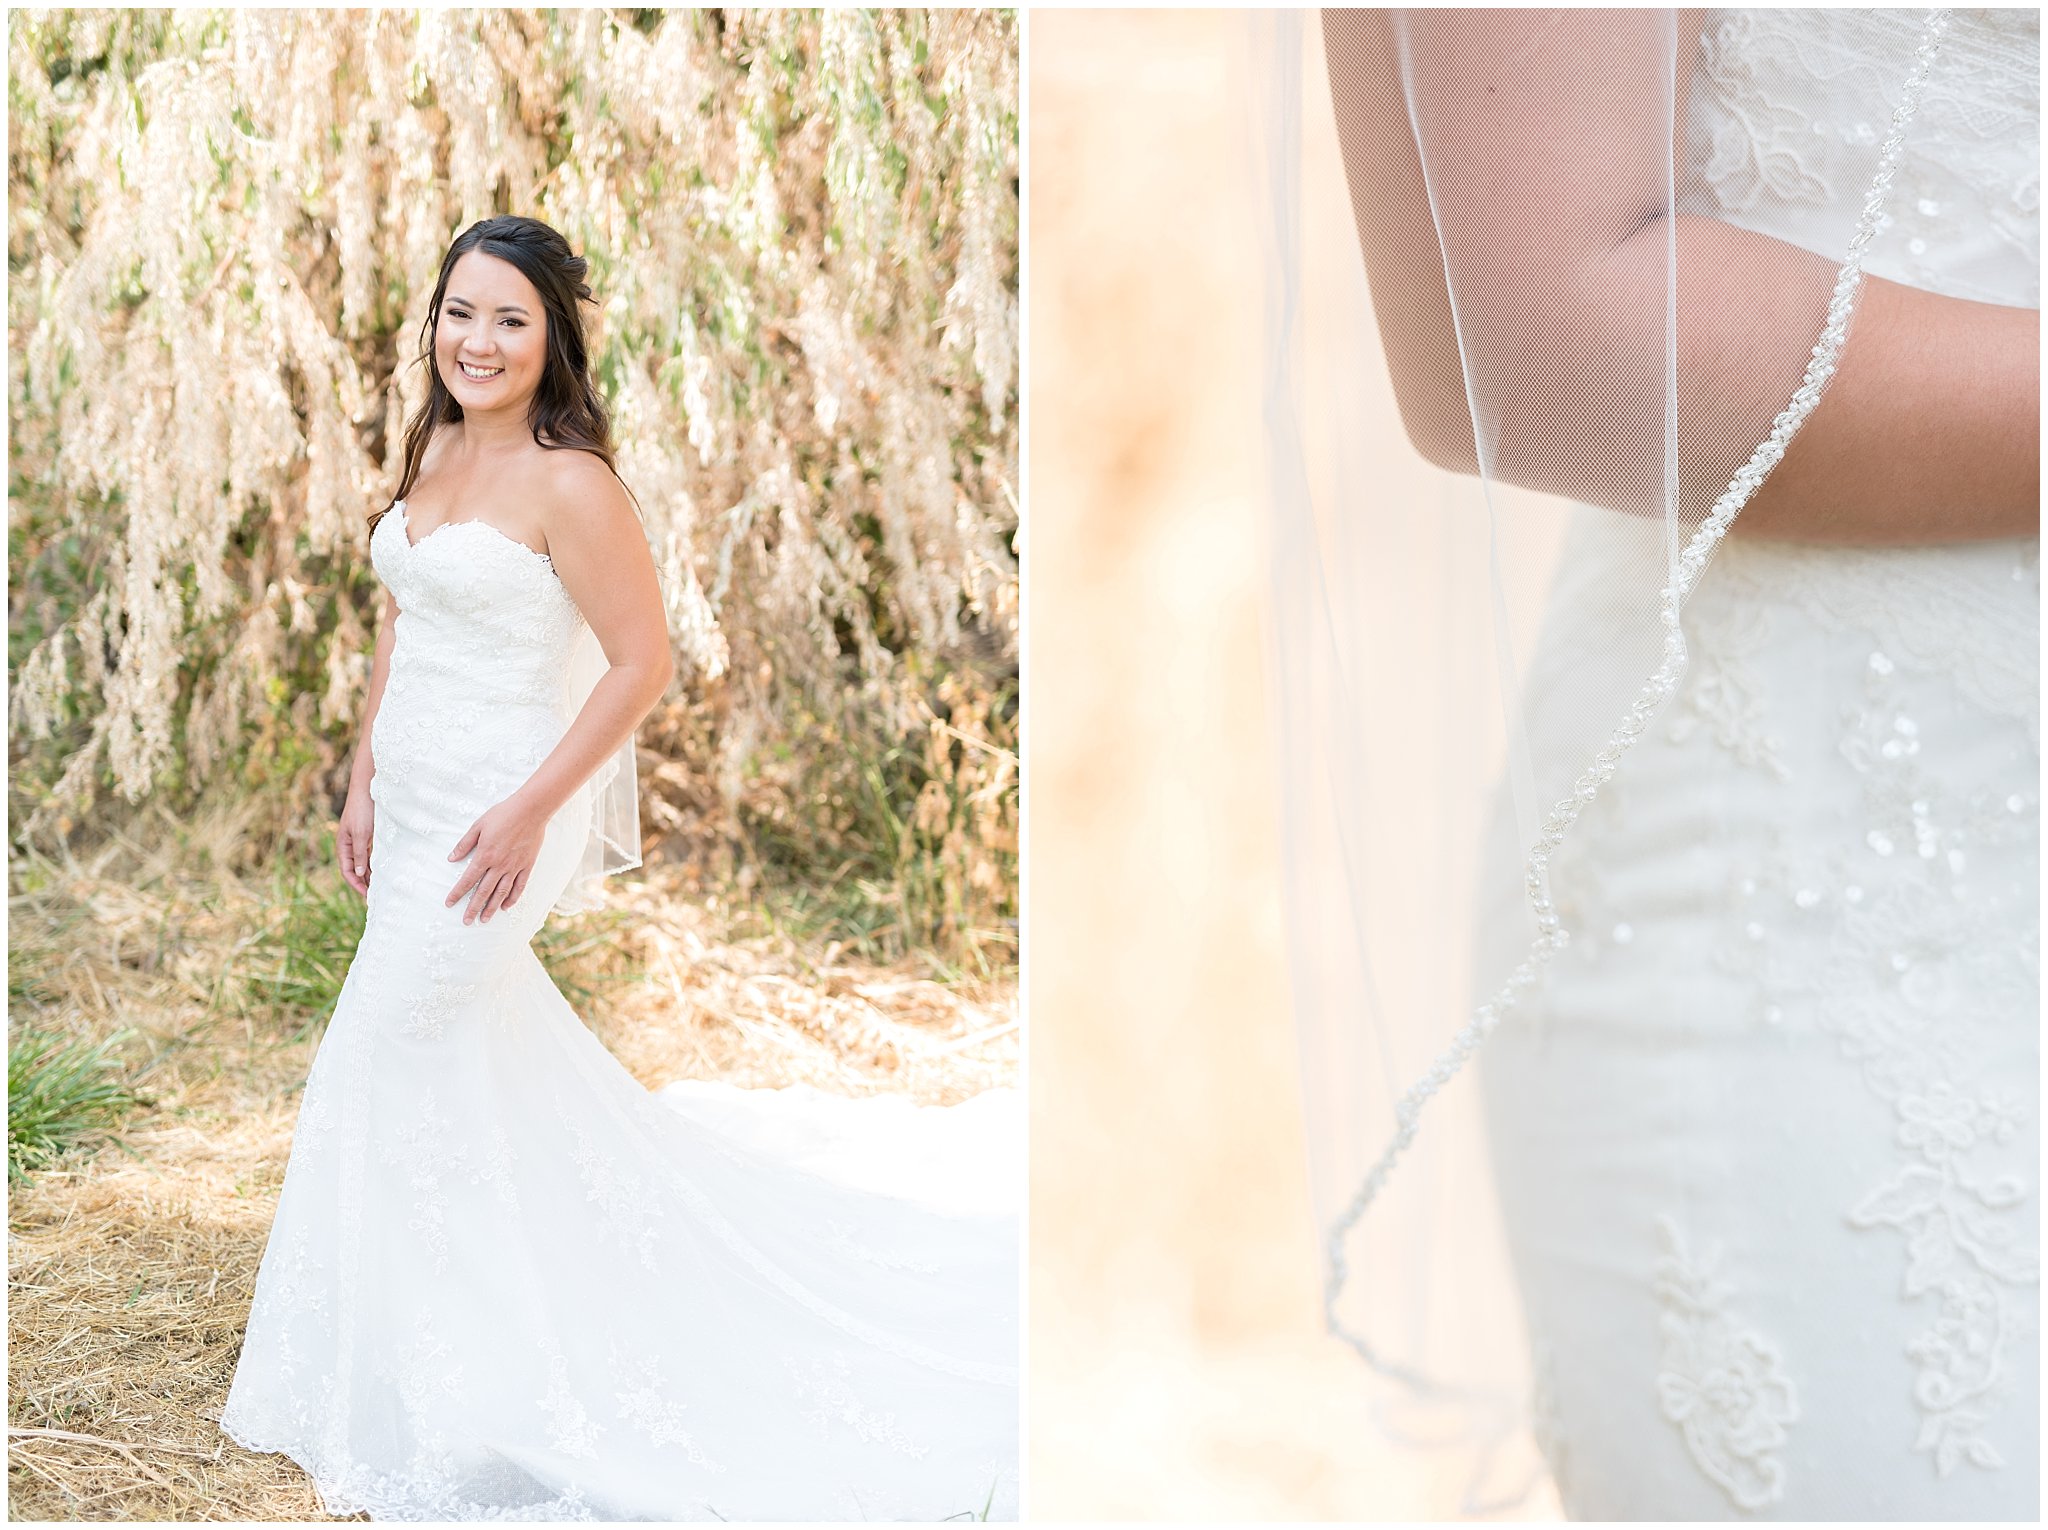 Details of bridal veil and bride smiling at the camera | Davis County Outdoor Wedding | Jessie and Dallin Photography